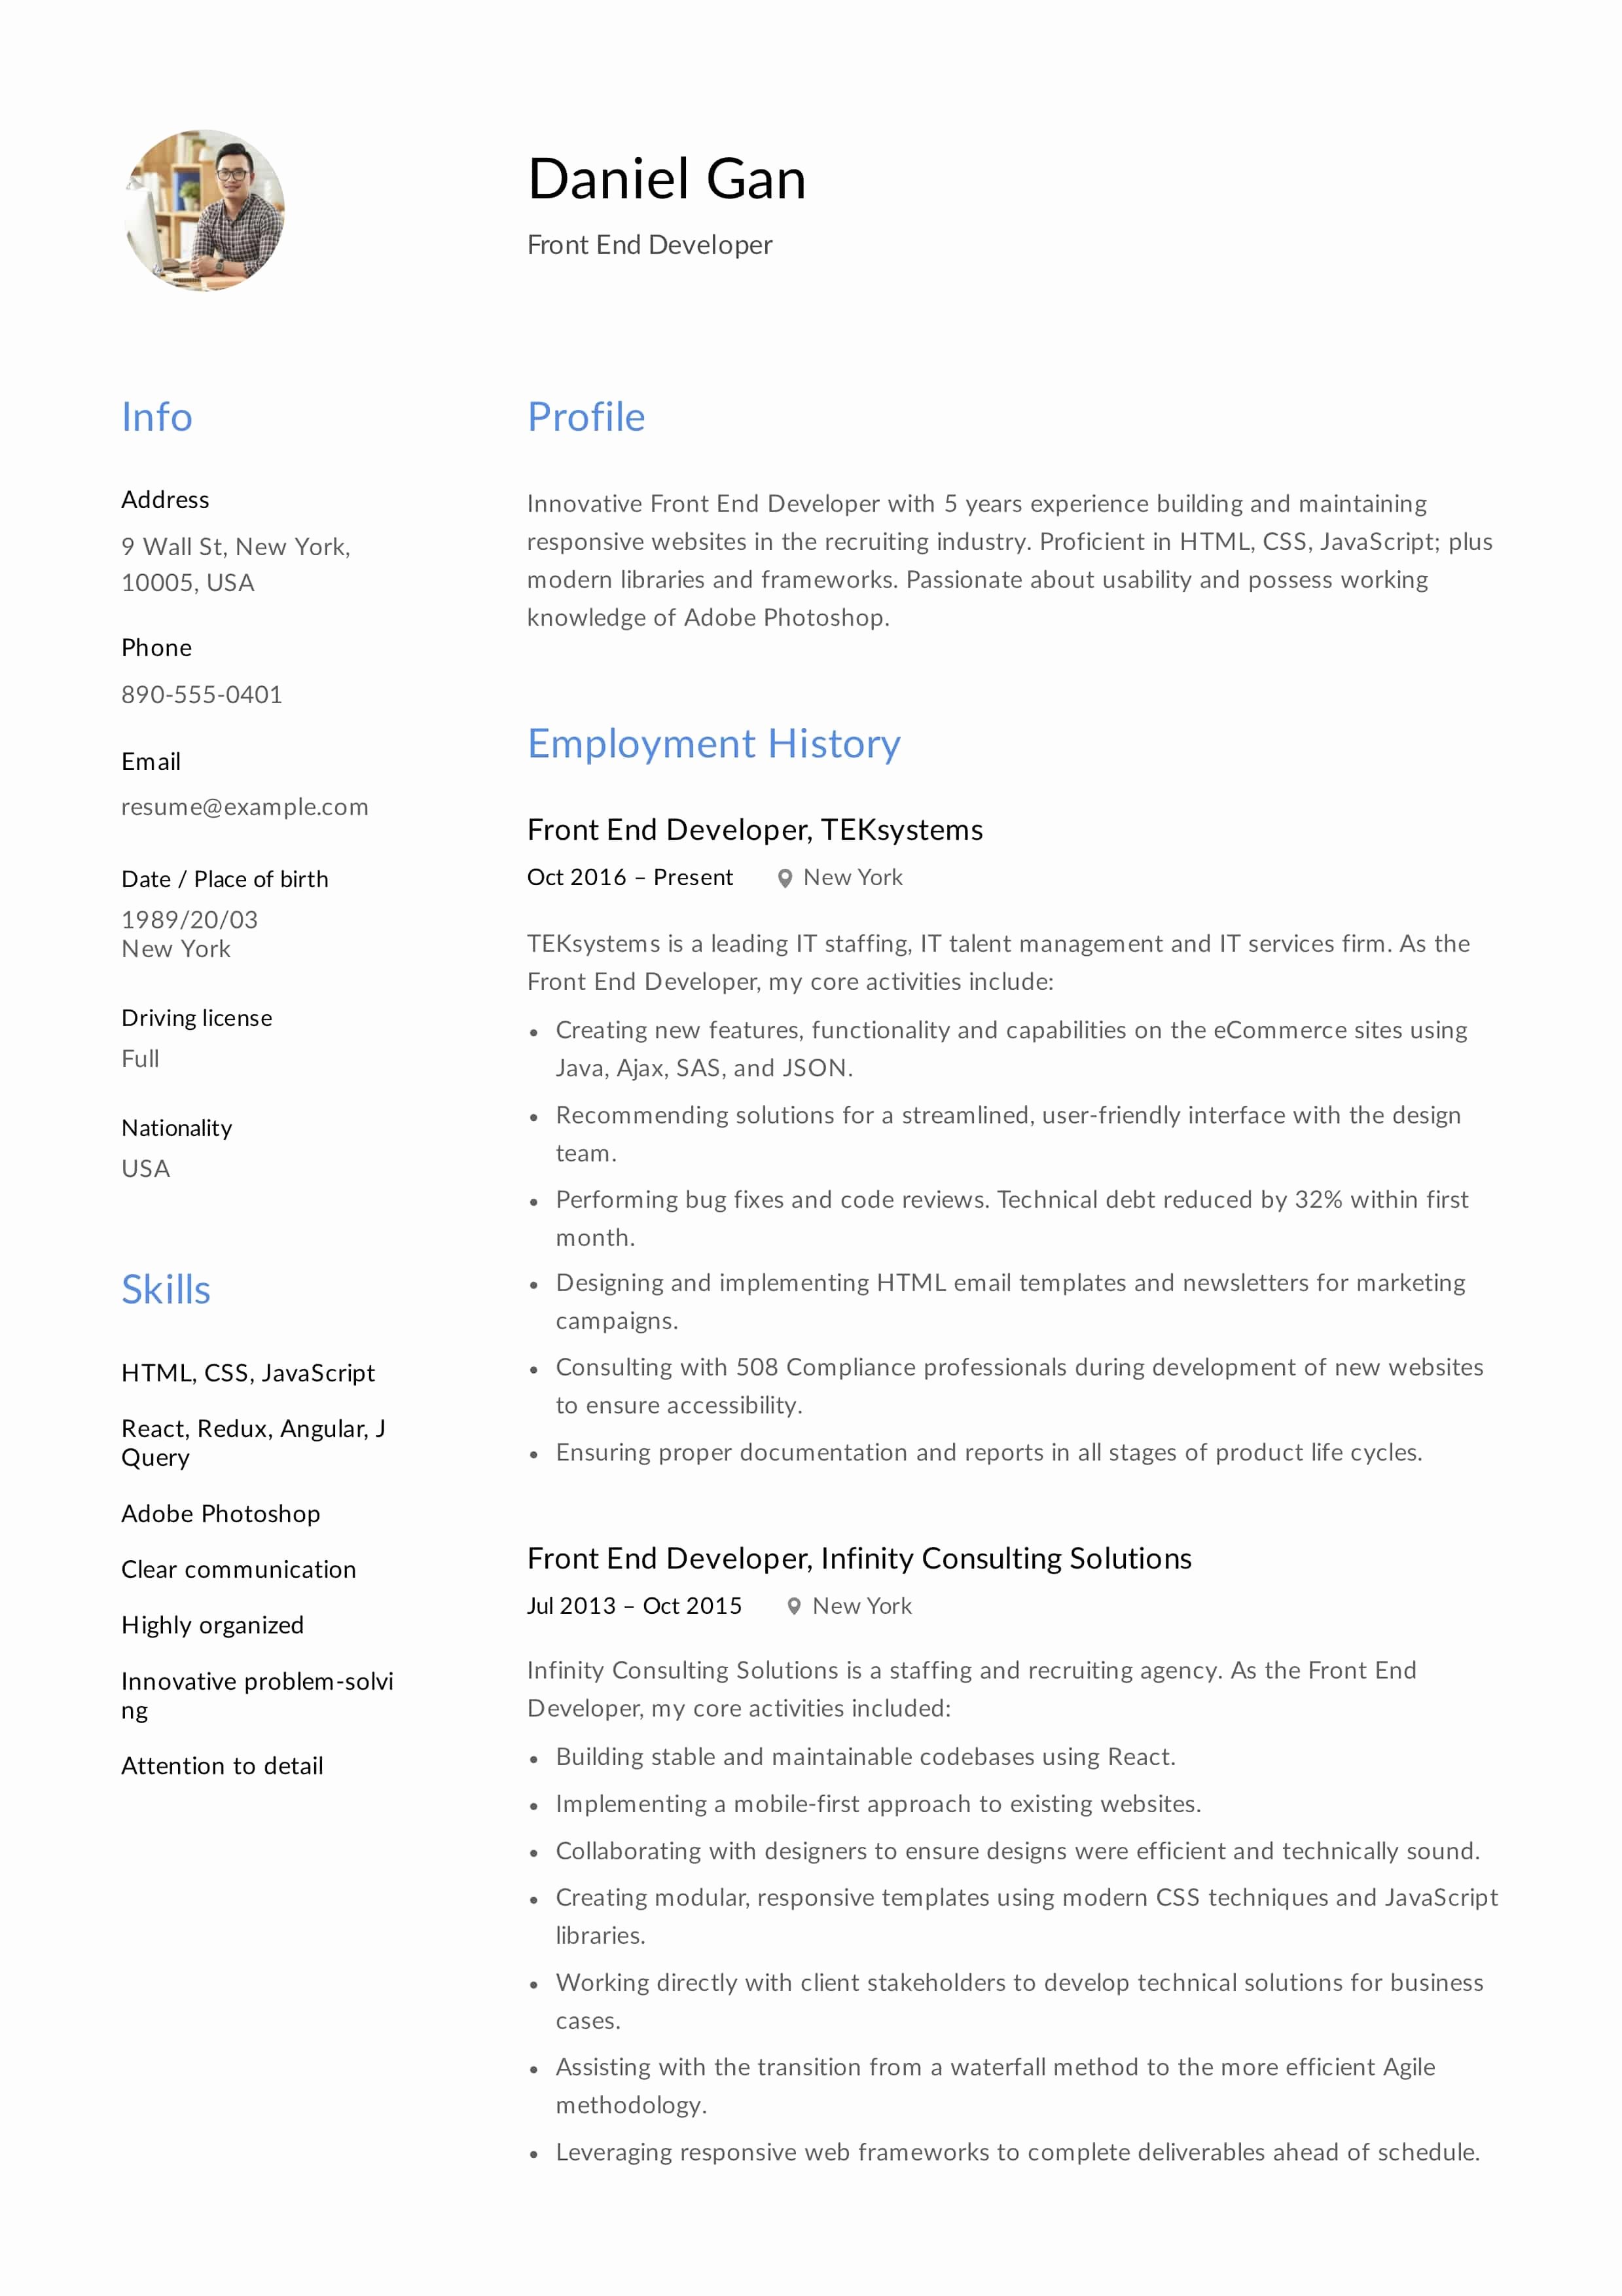 Front End Developer Resume Template Beautiful Guide Front End Developer Resume [ 12 Samples ] Pdf